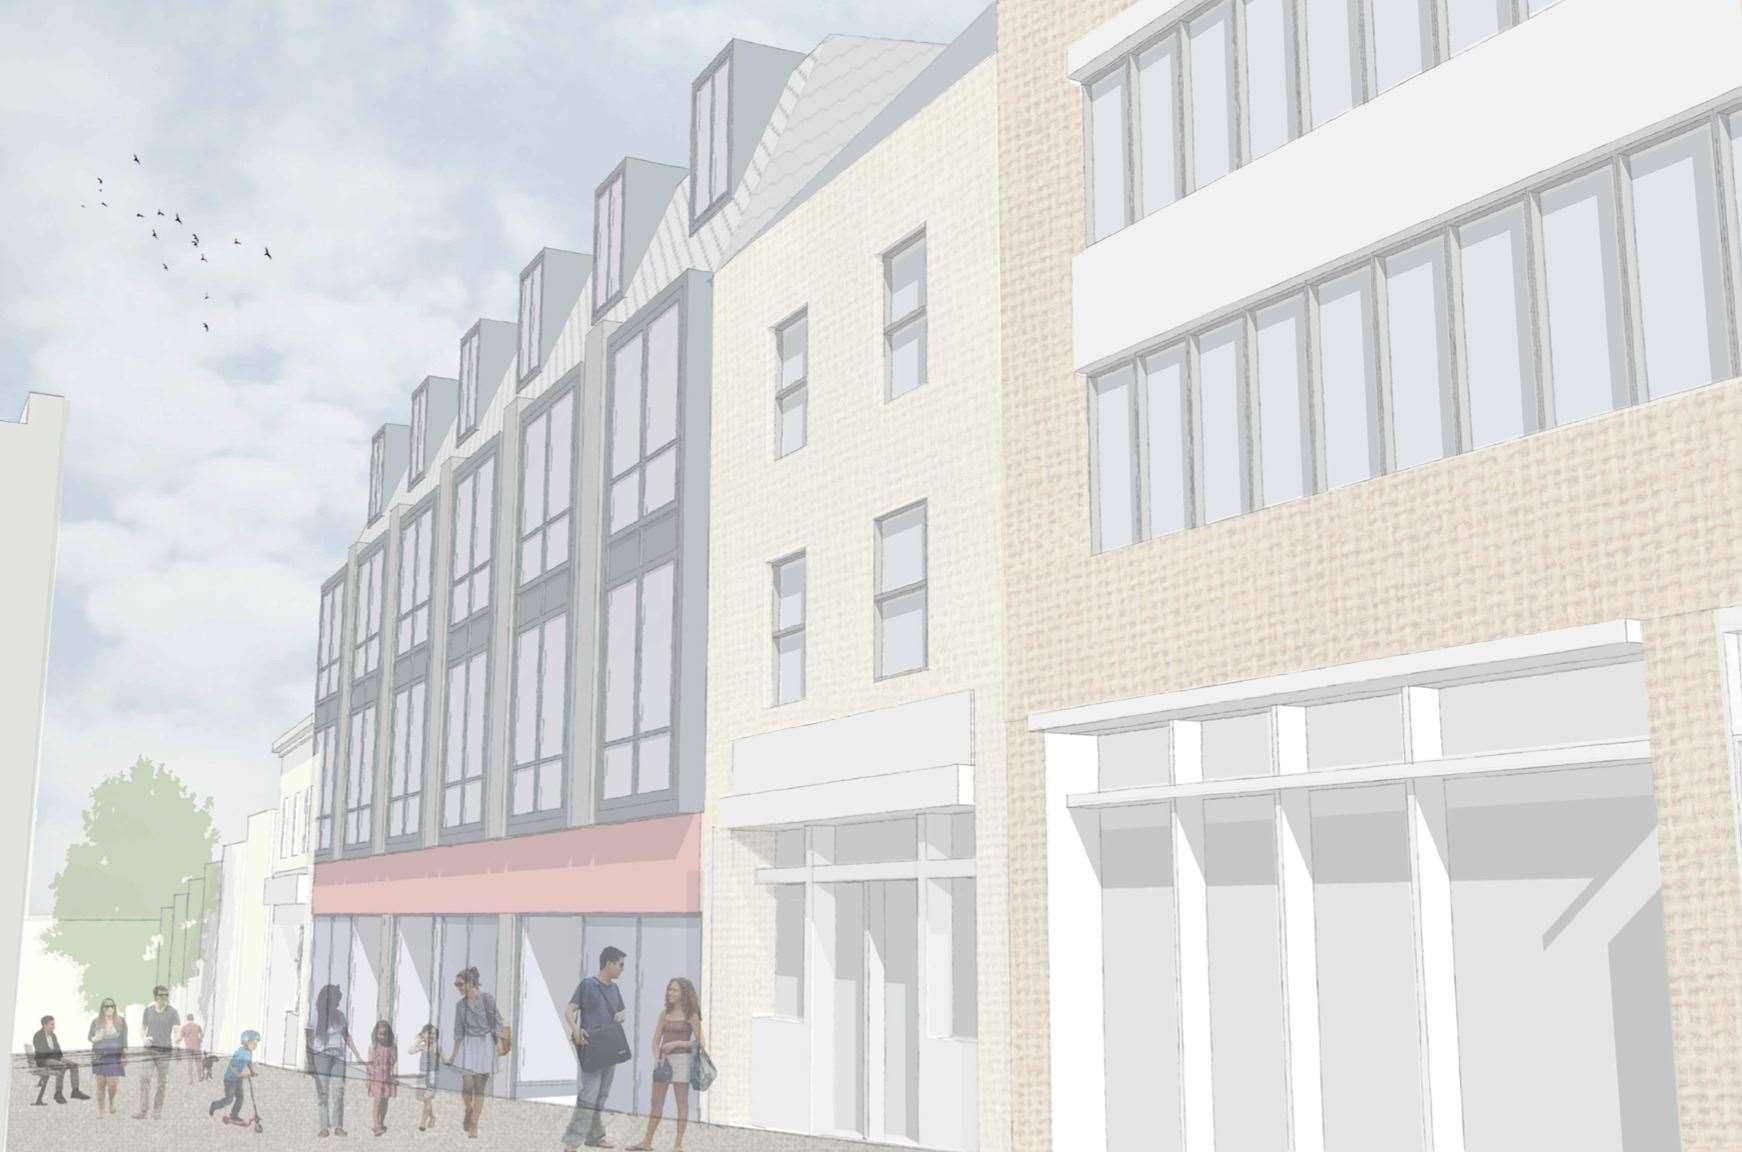 The new development would be a mix of residential and retail space on Margate High Street